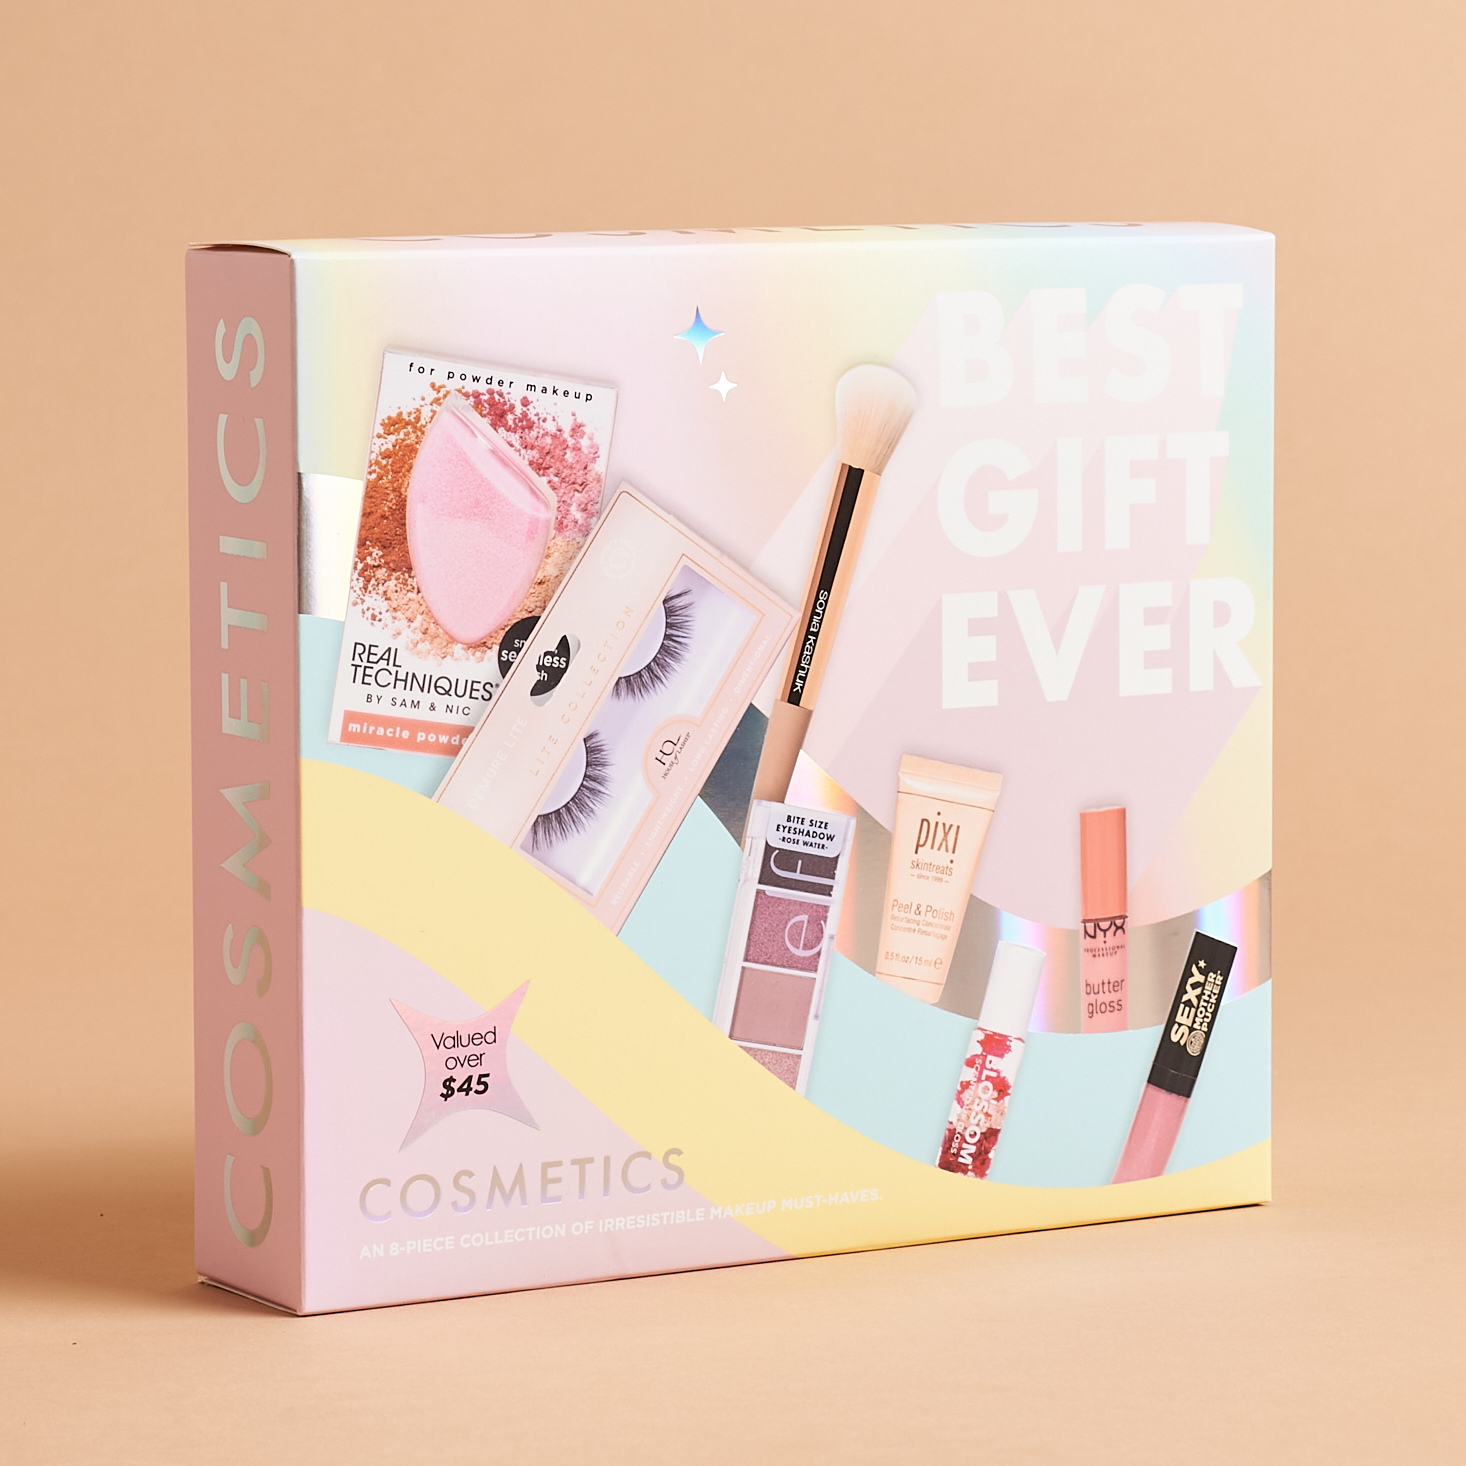 Target “Best of Cosmetics” Beauty Box Review – December 2020